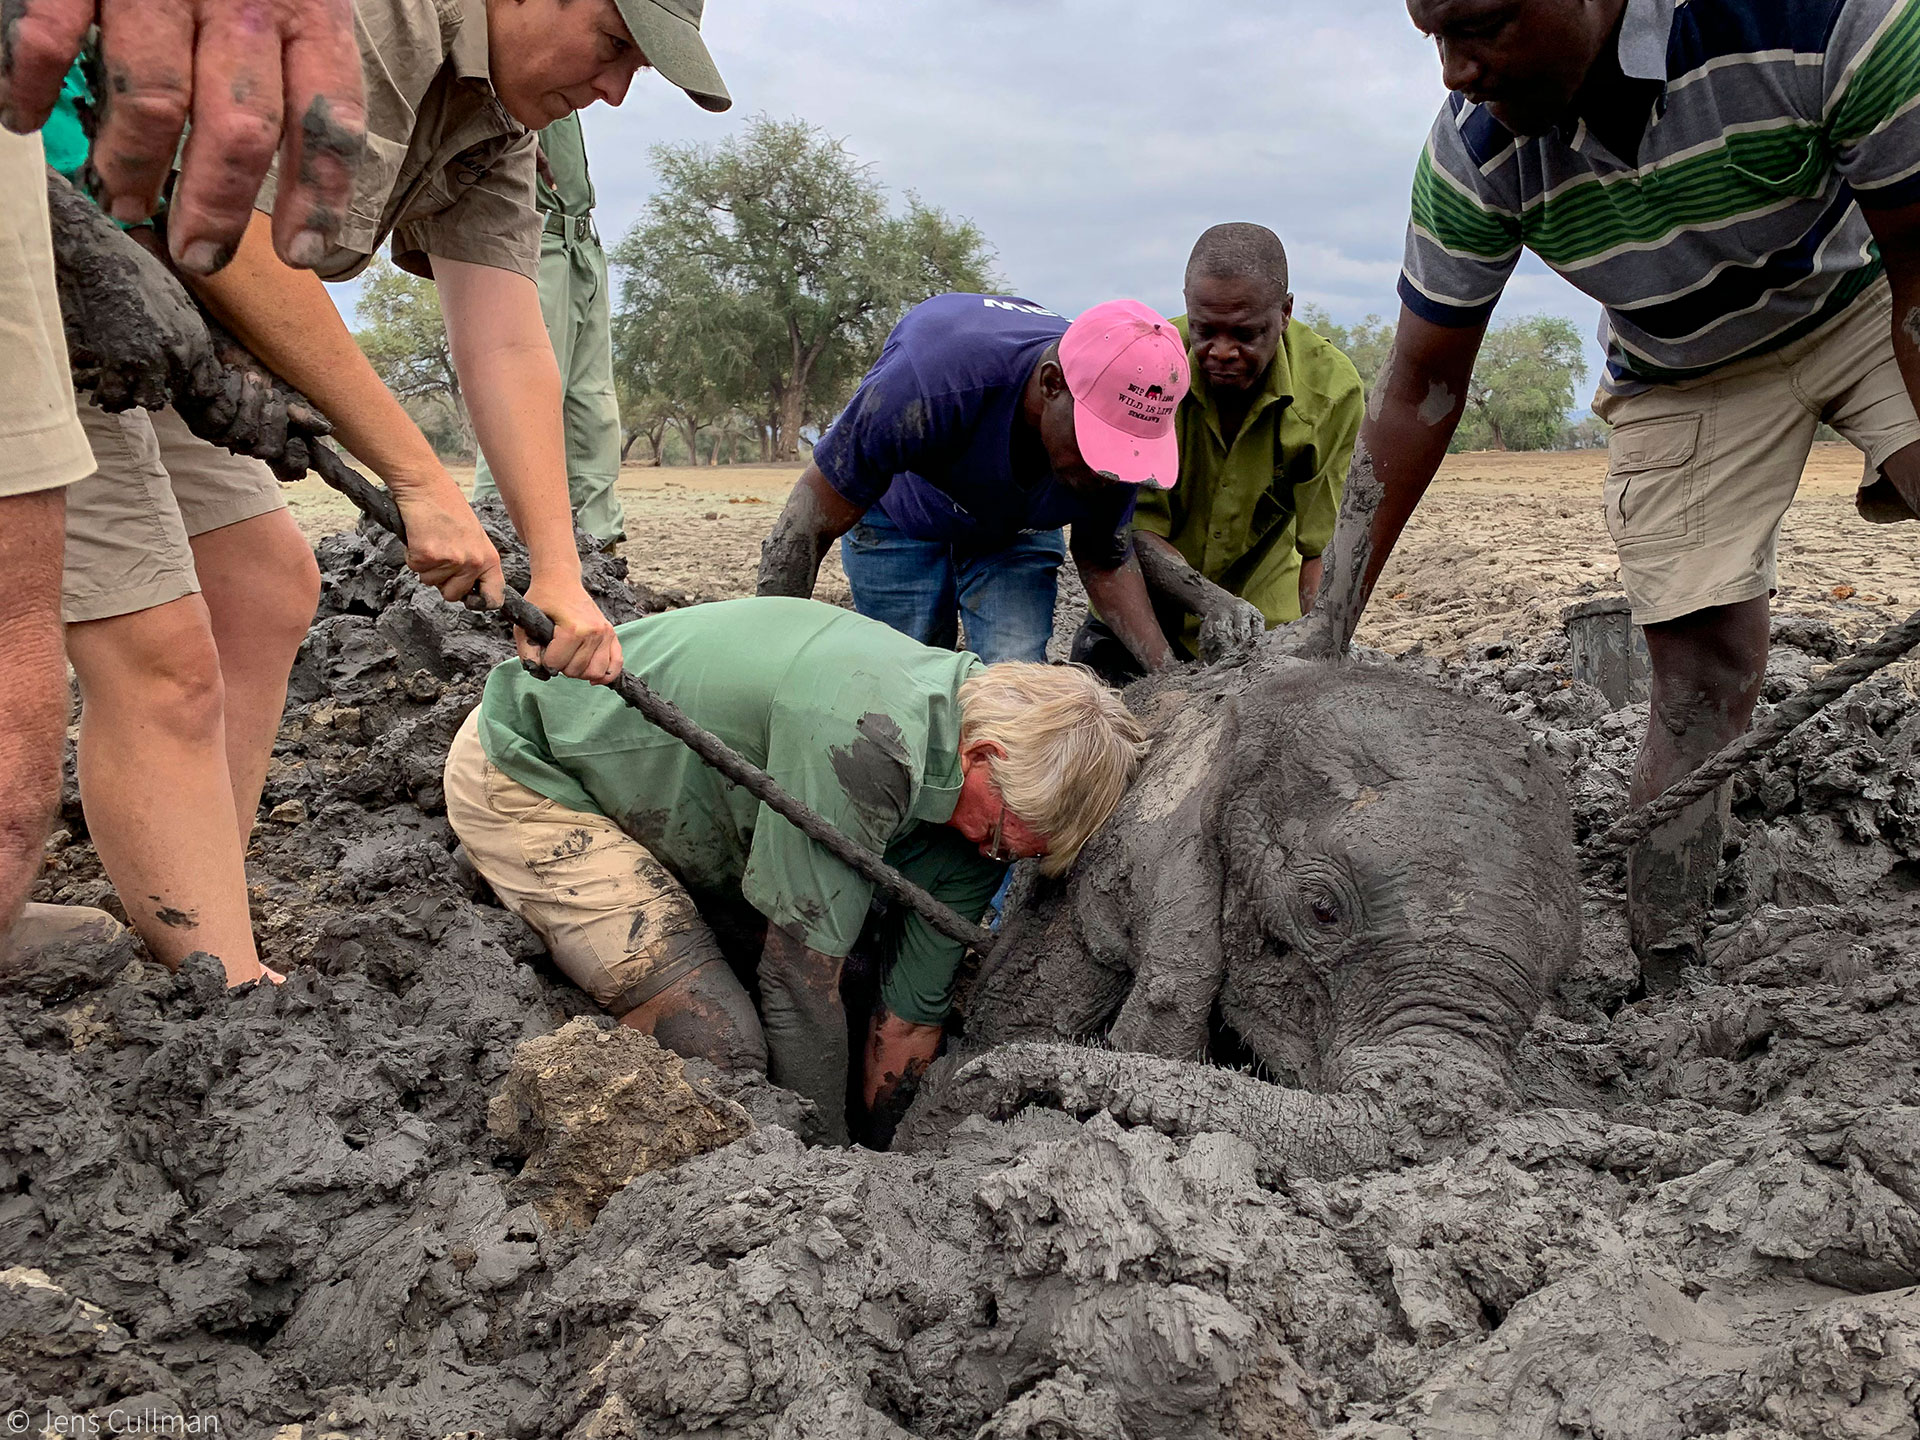 Baby elephants rescued